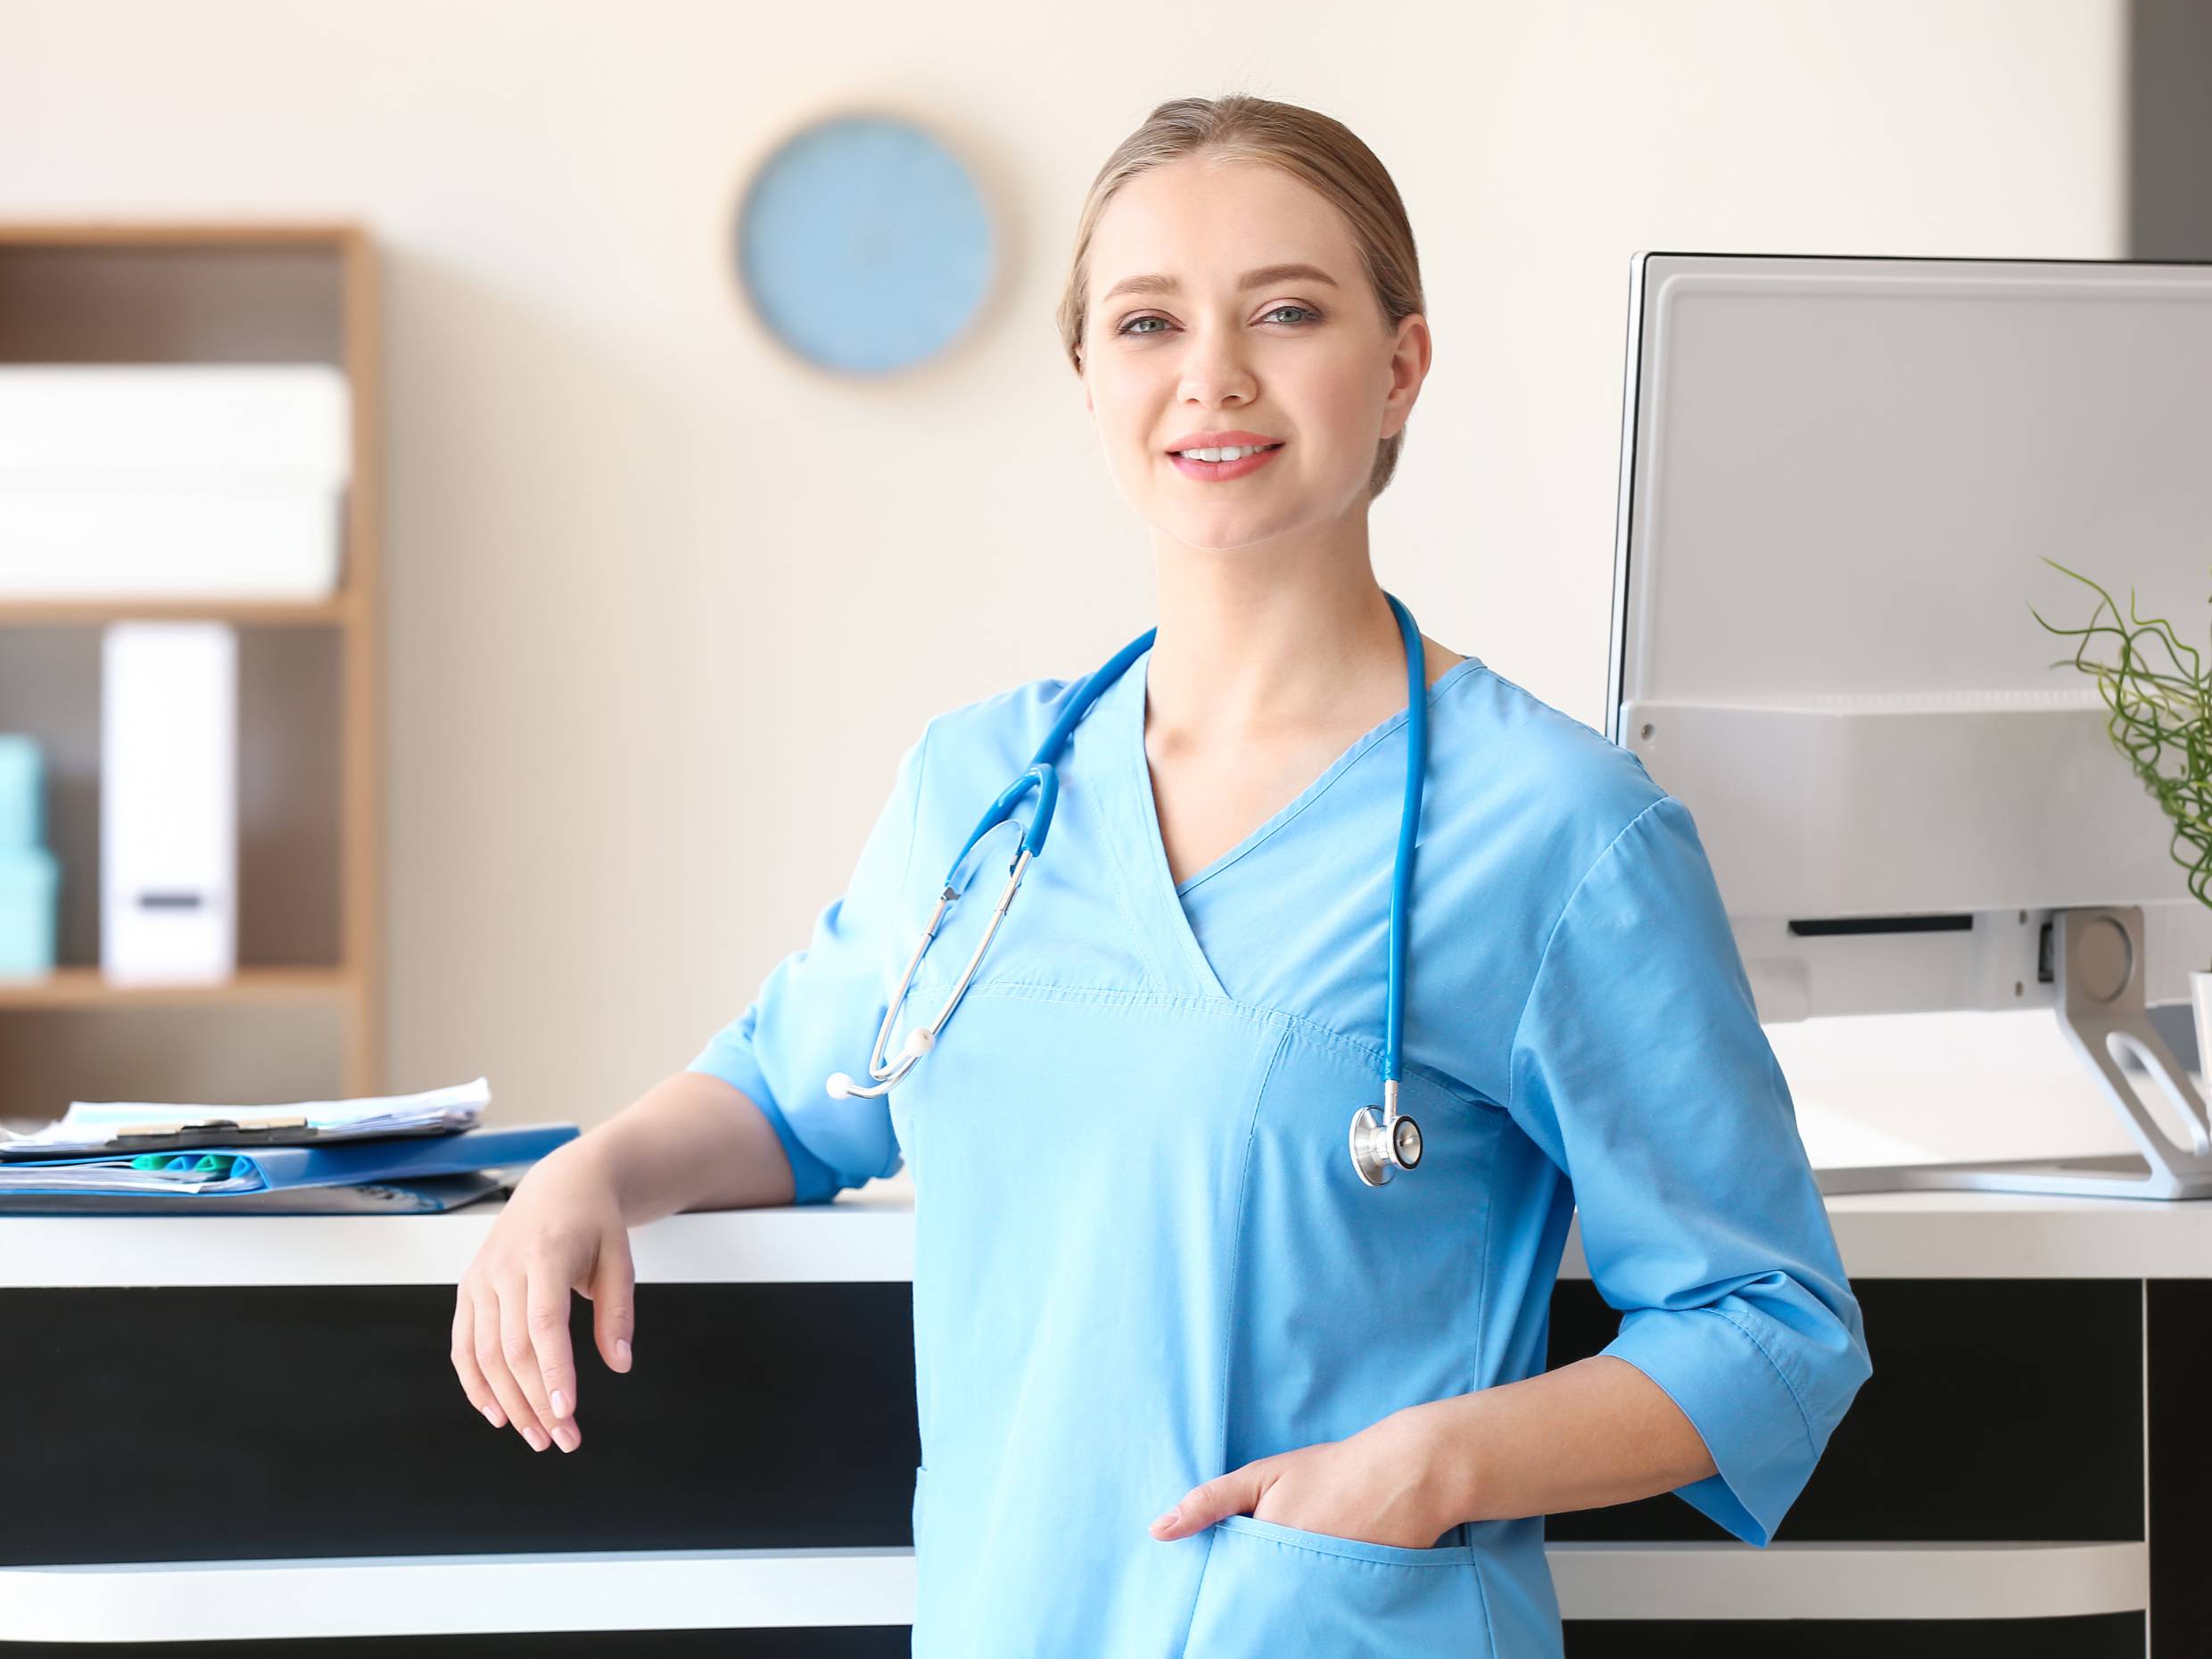 Medical Office Manager standing confidently in medical office reception area